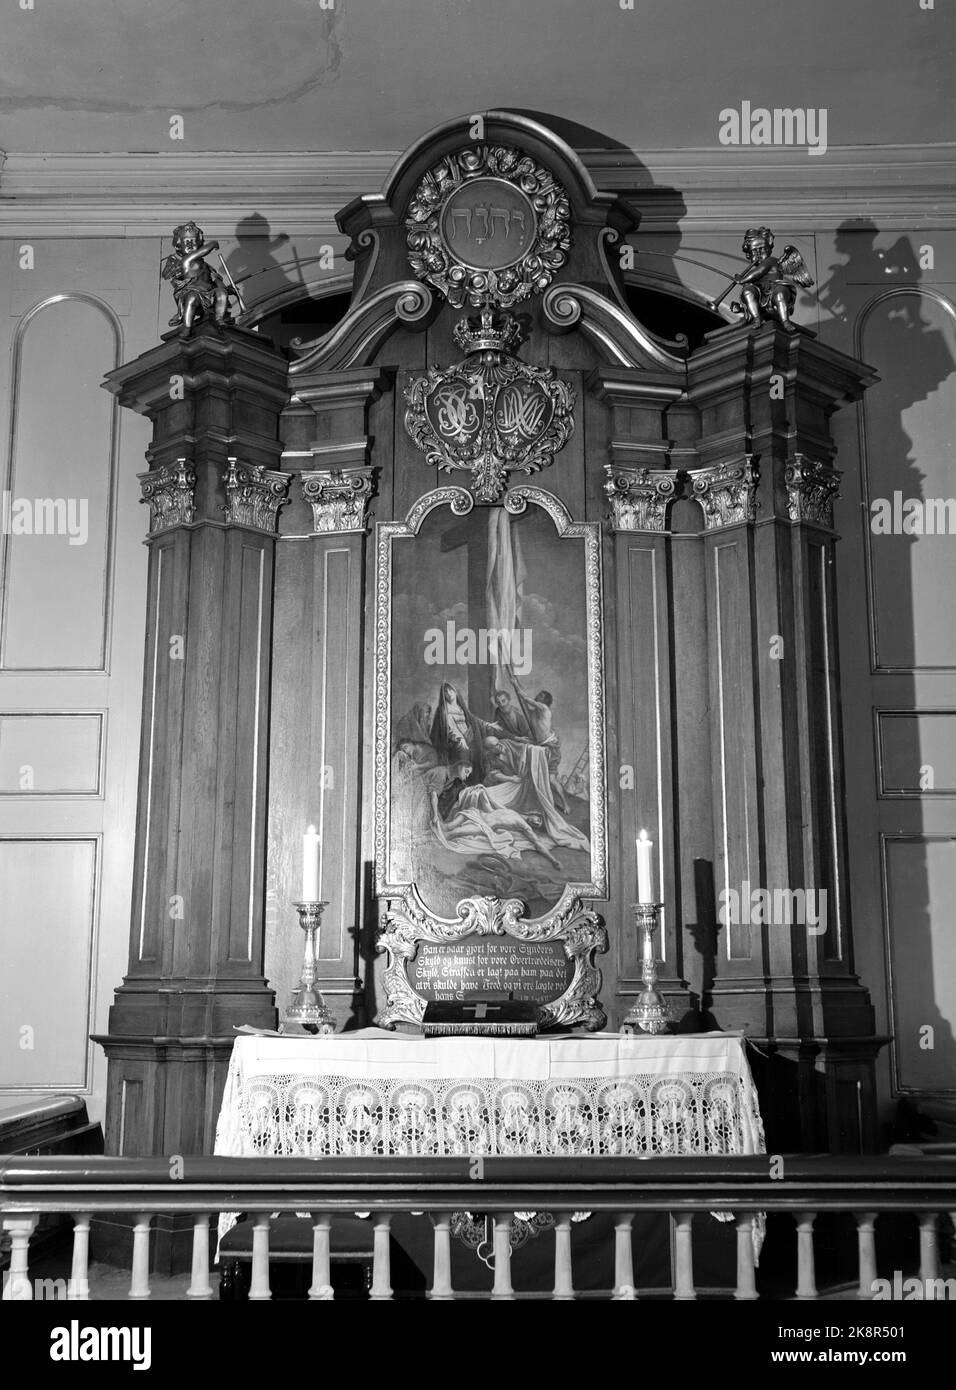 Oslo 1950. Akershus castle newly restored. The construction of the castle is time -fixed as early as the 1300s. The altarpiece in the garrison church that probably dates from the mid -16th century. Even before that time, regular services have been held here. Photo: Sverre A. Børretzen / Current / NTB Stock Photo